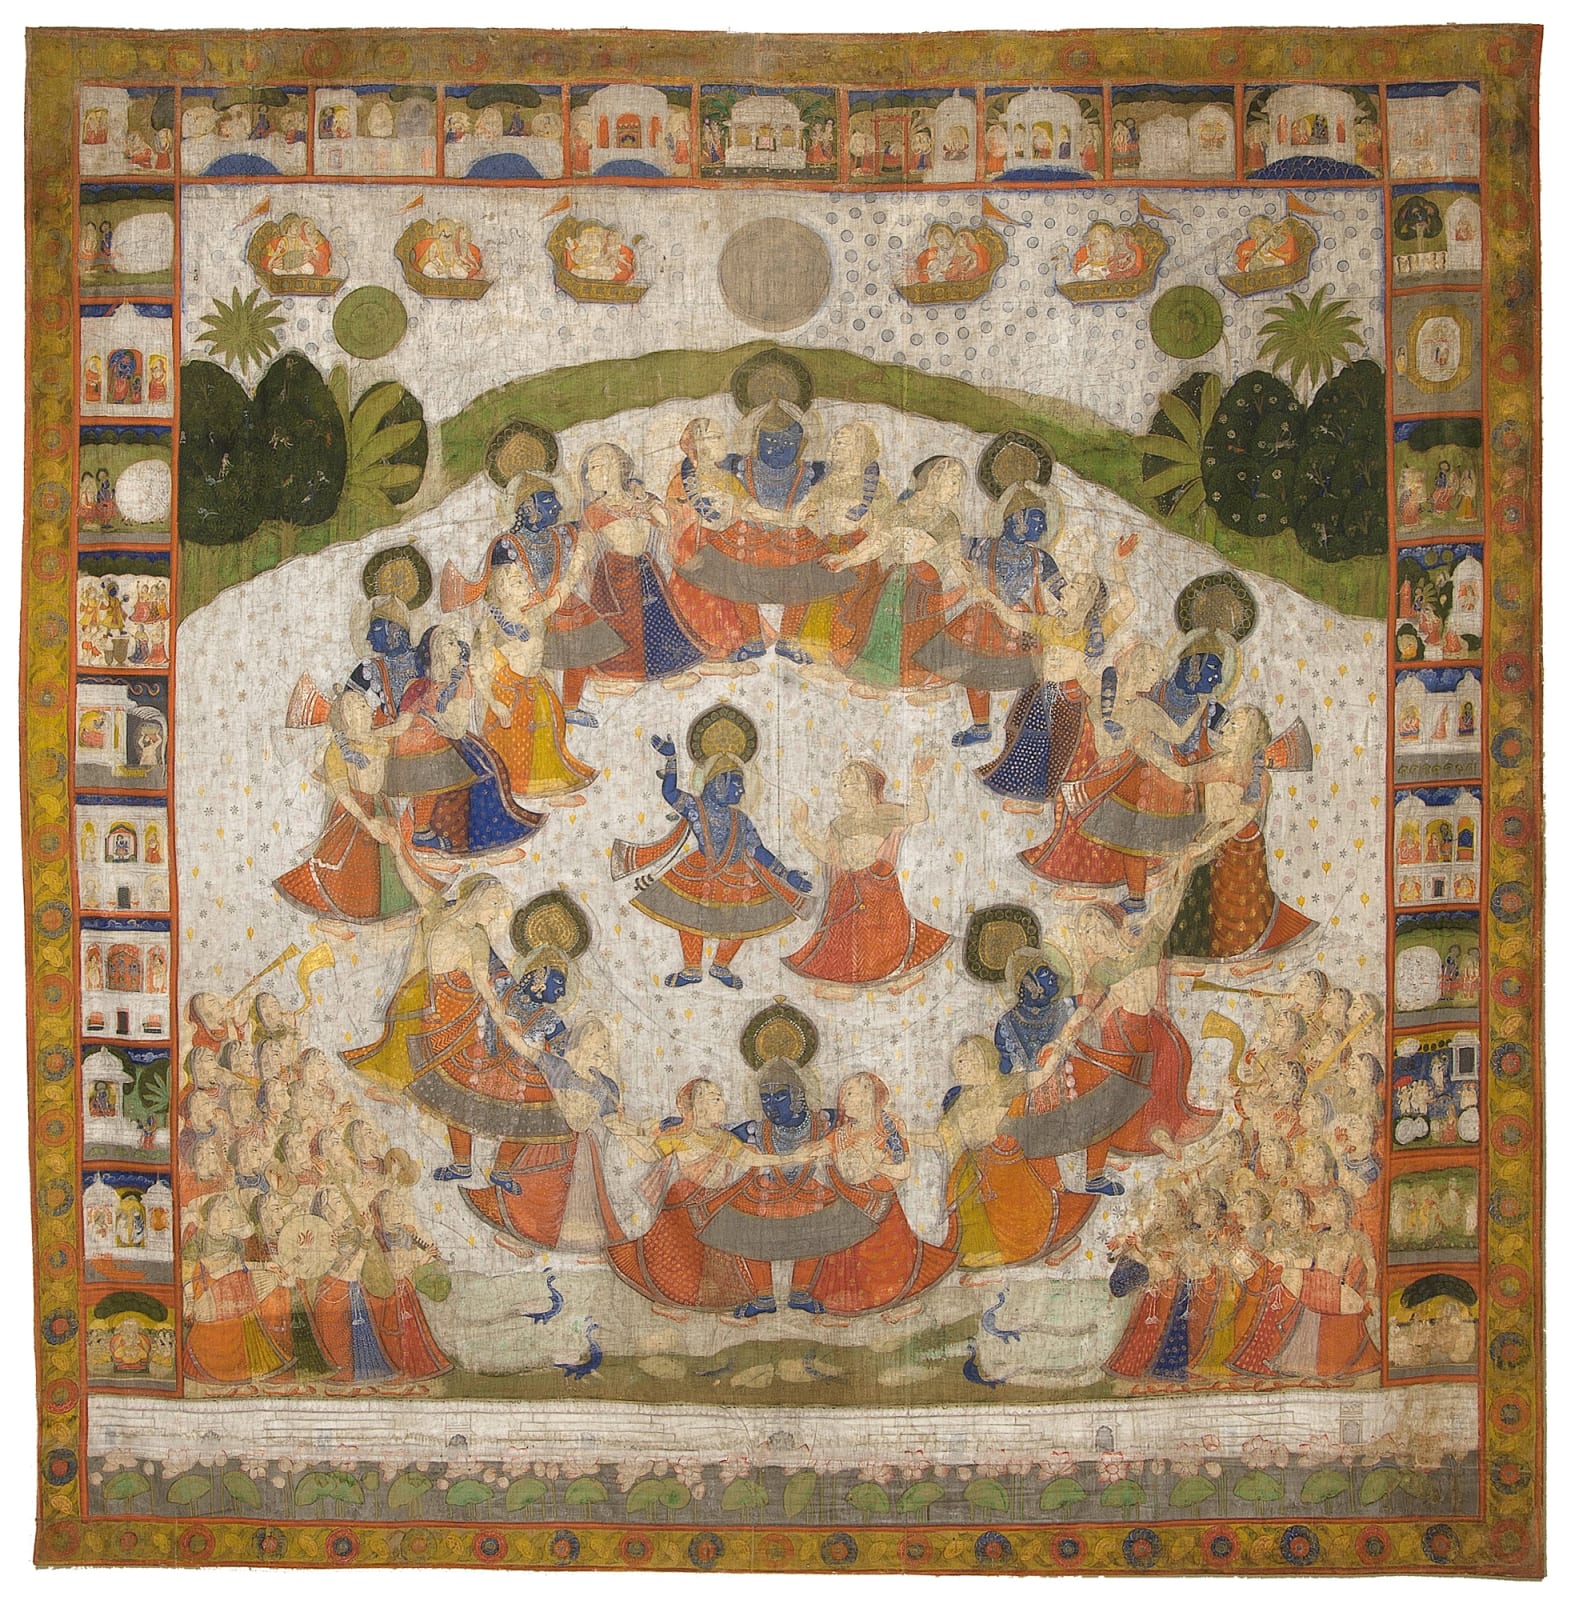 Pichvai of Rasa Lila for Sharad Purnima (Autumnal Full Moon Dance), Nathdwara, mid to second half of 19th century